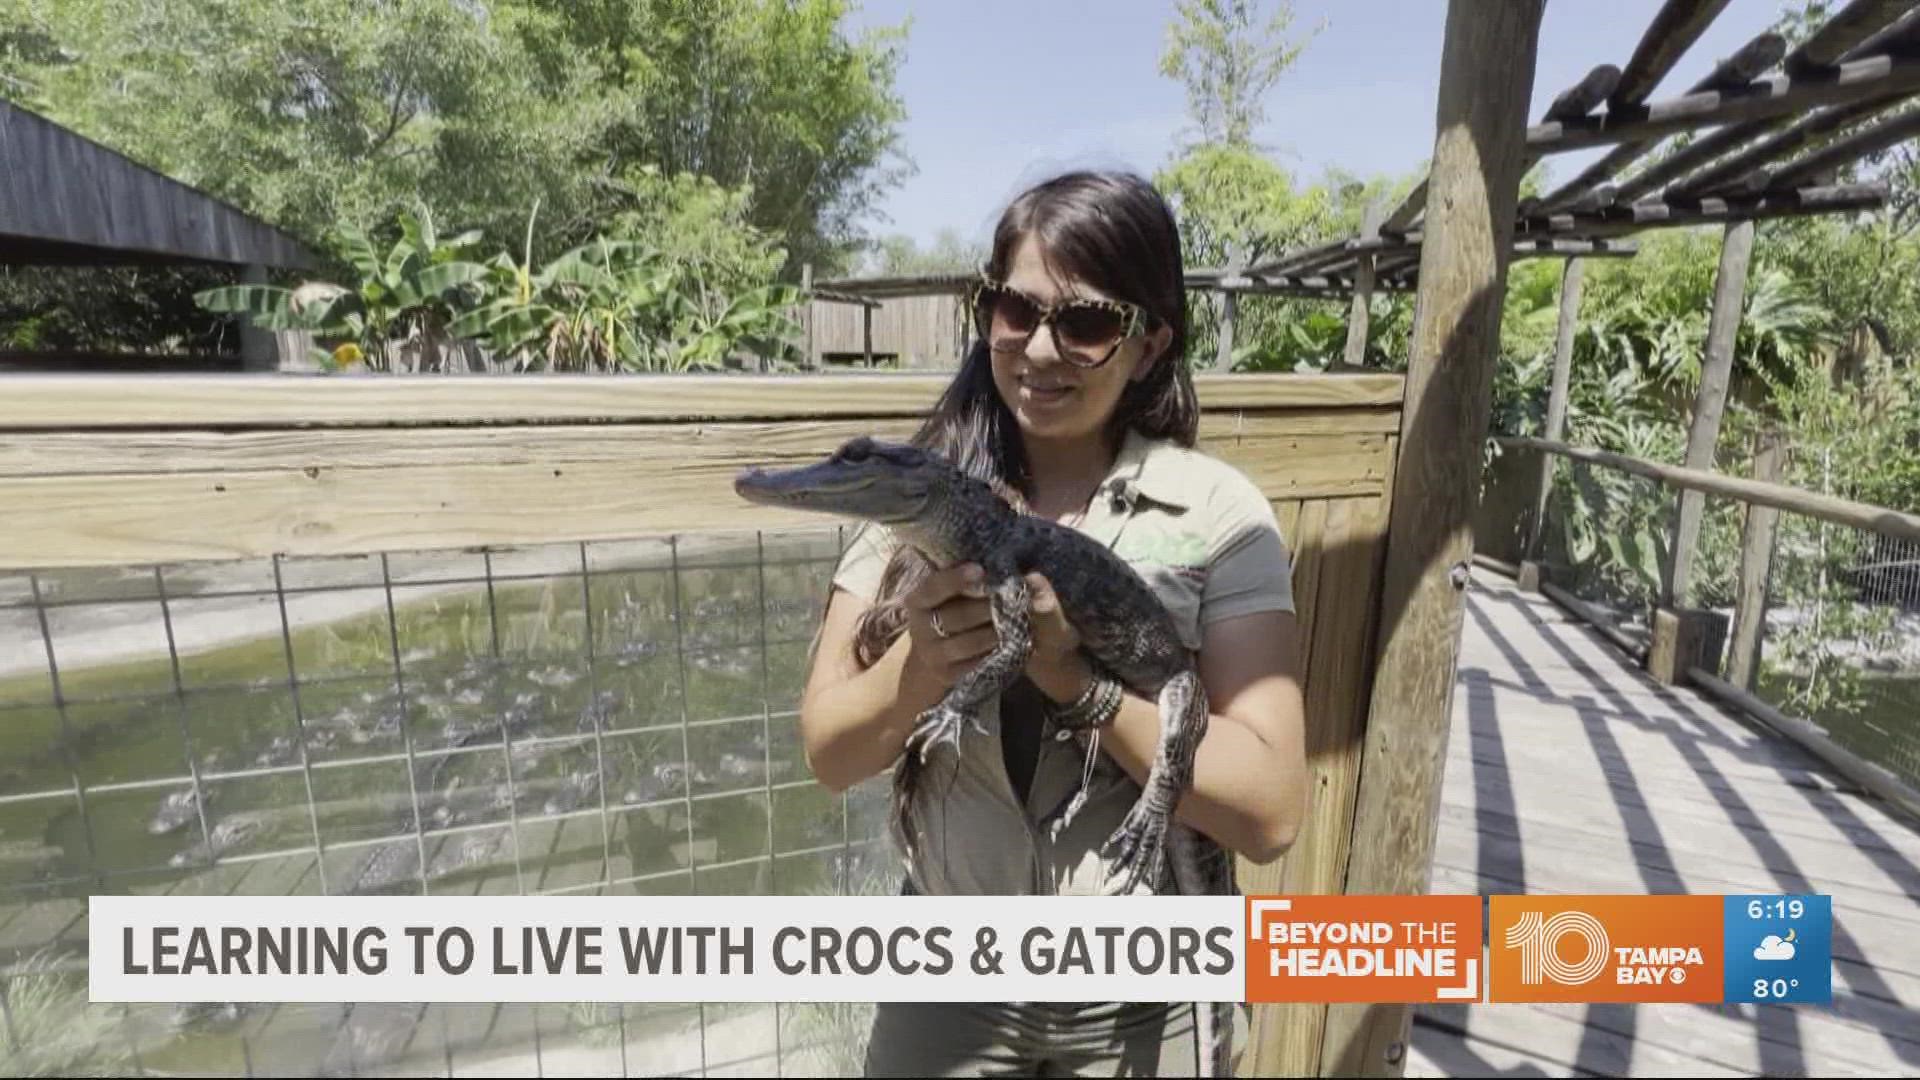 Experts give us tips on how to safely navigate daily life with both crocodiles and gators.